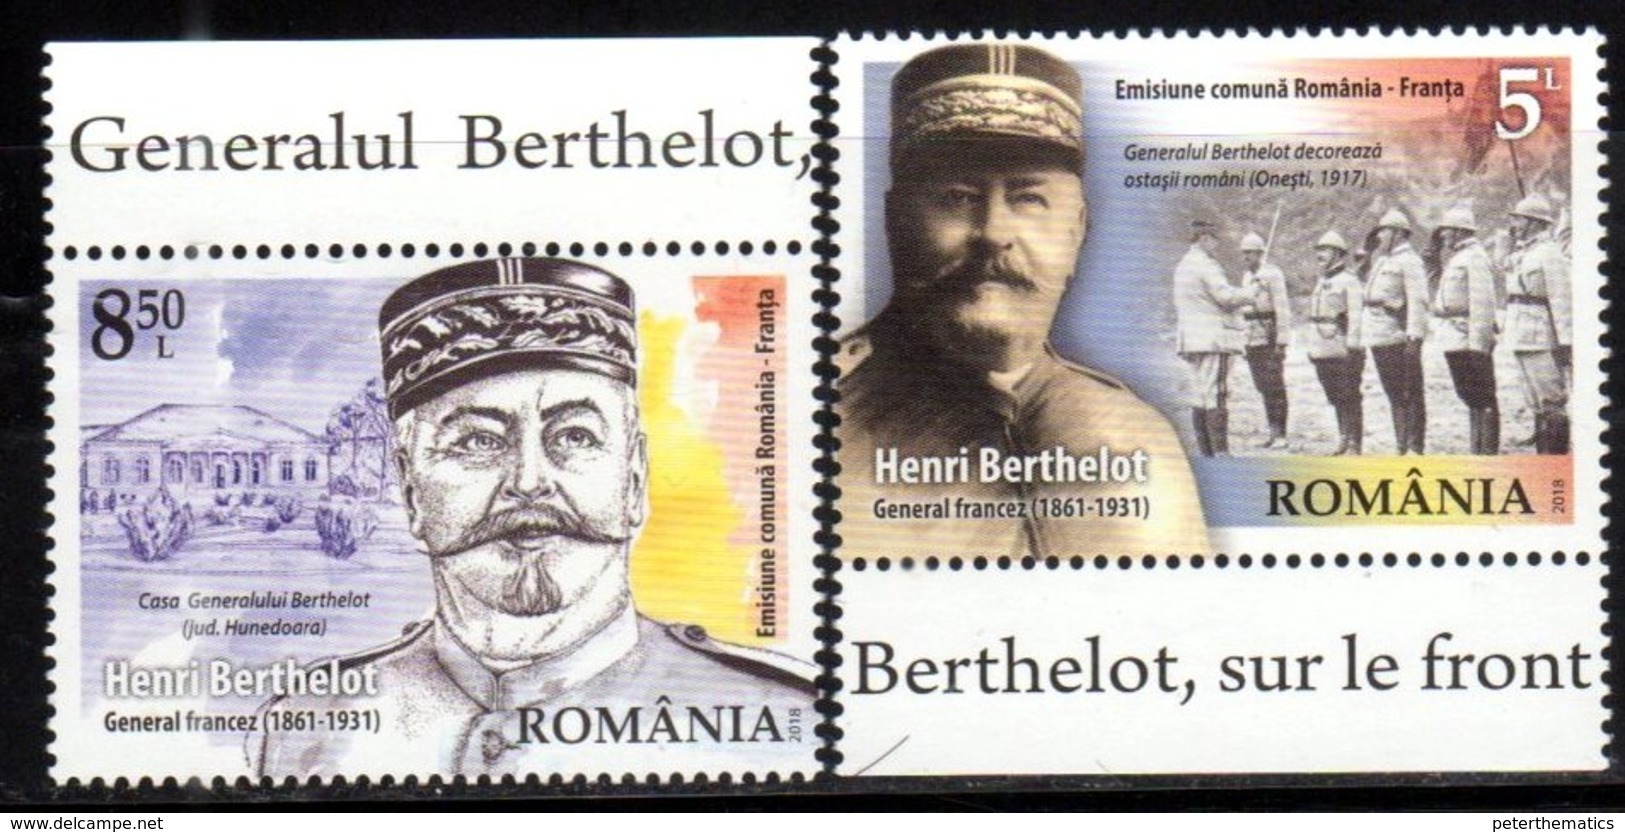 ROMANIA, 2018, MNH, WWI, JOINT ISSUE WITH FRANCE, GENERAL BERTHELOT, SOLDIERS, MILITARY, 2v - WW1